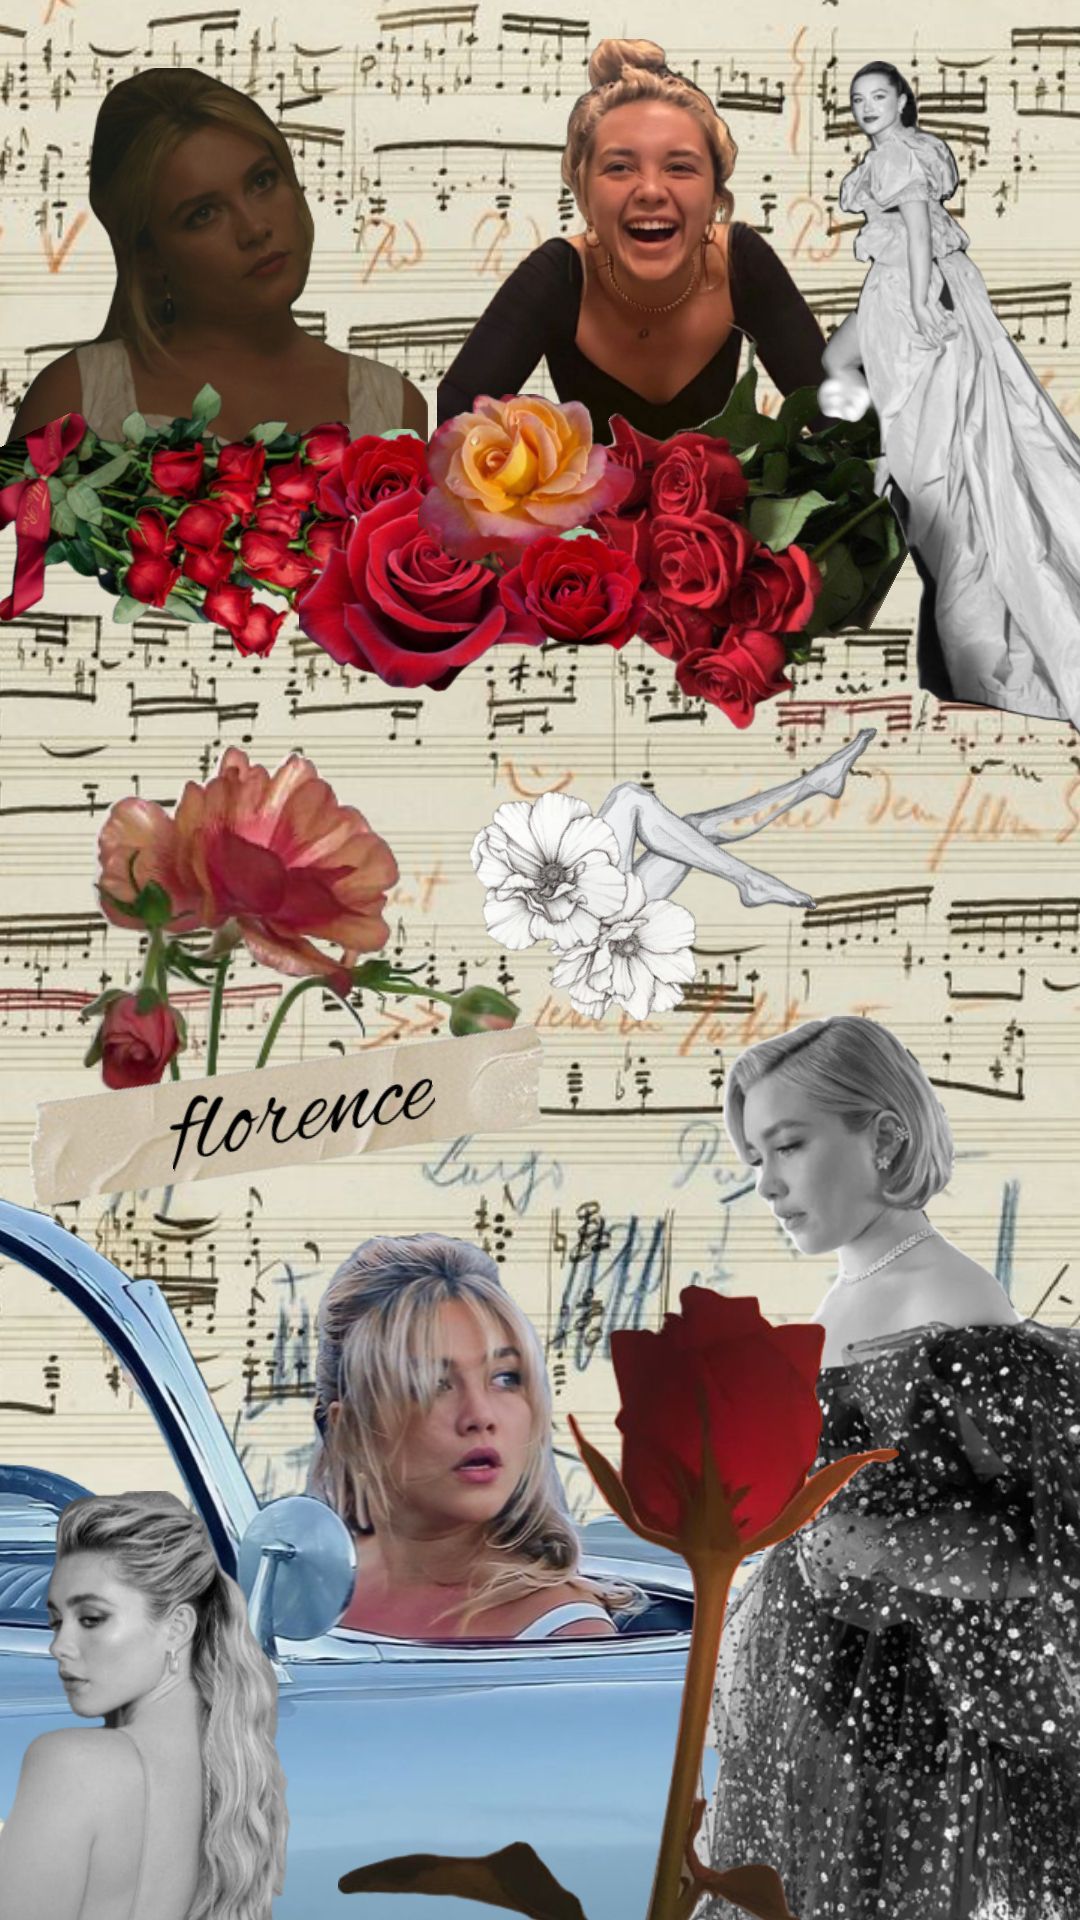 Florence Pugh wallpaper I made! Credit to the original artist for the Florence Pugh and red rose image! - Florence Pugh